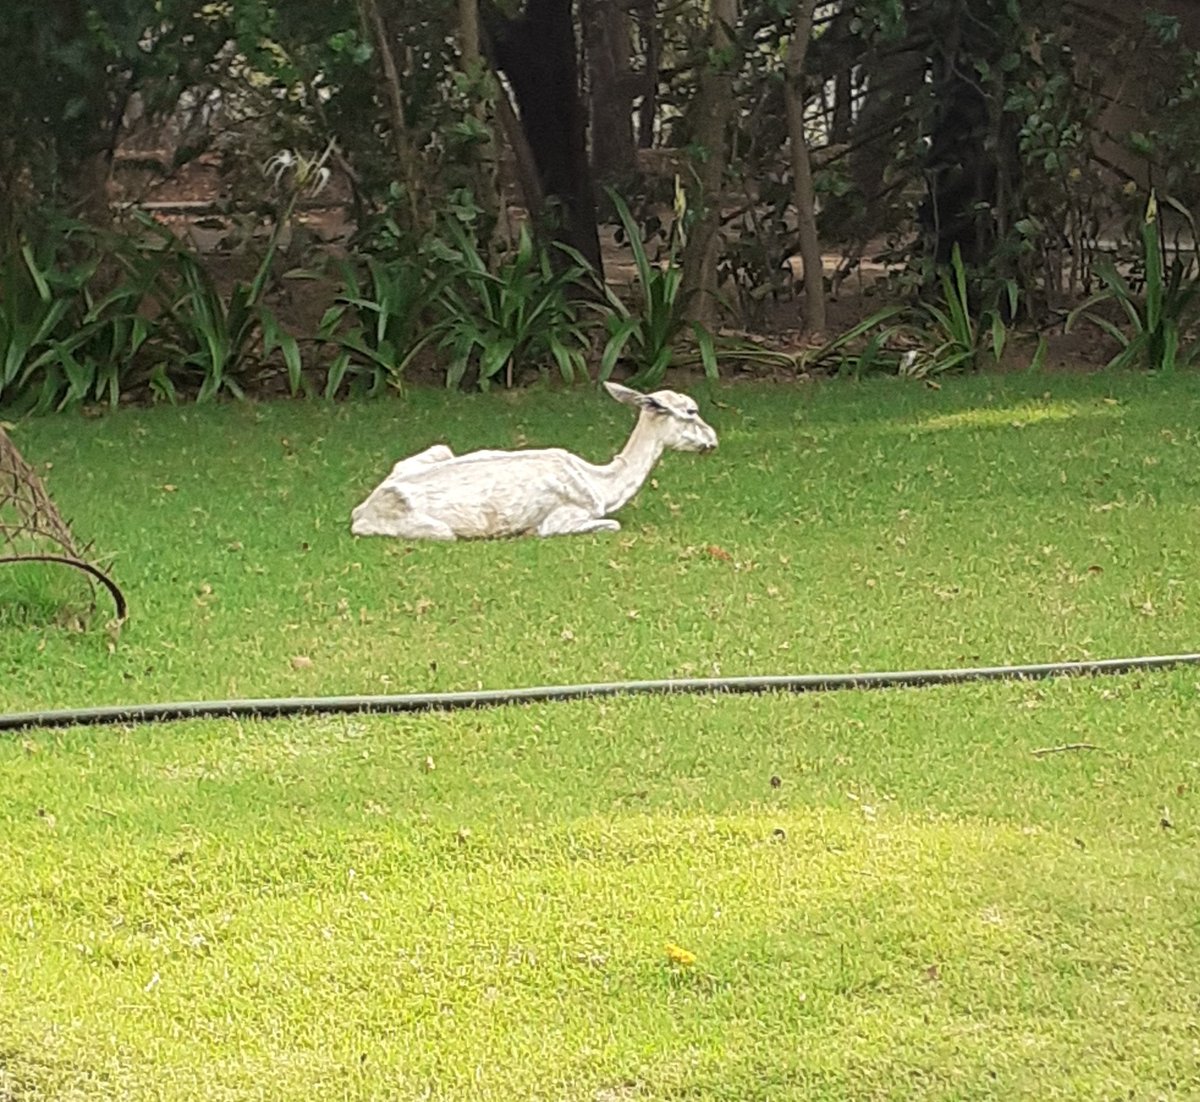 The beautiful blackbuck seems to have a white counterpart!